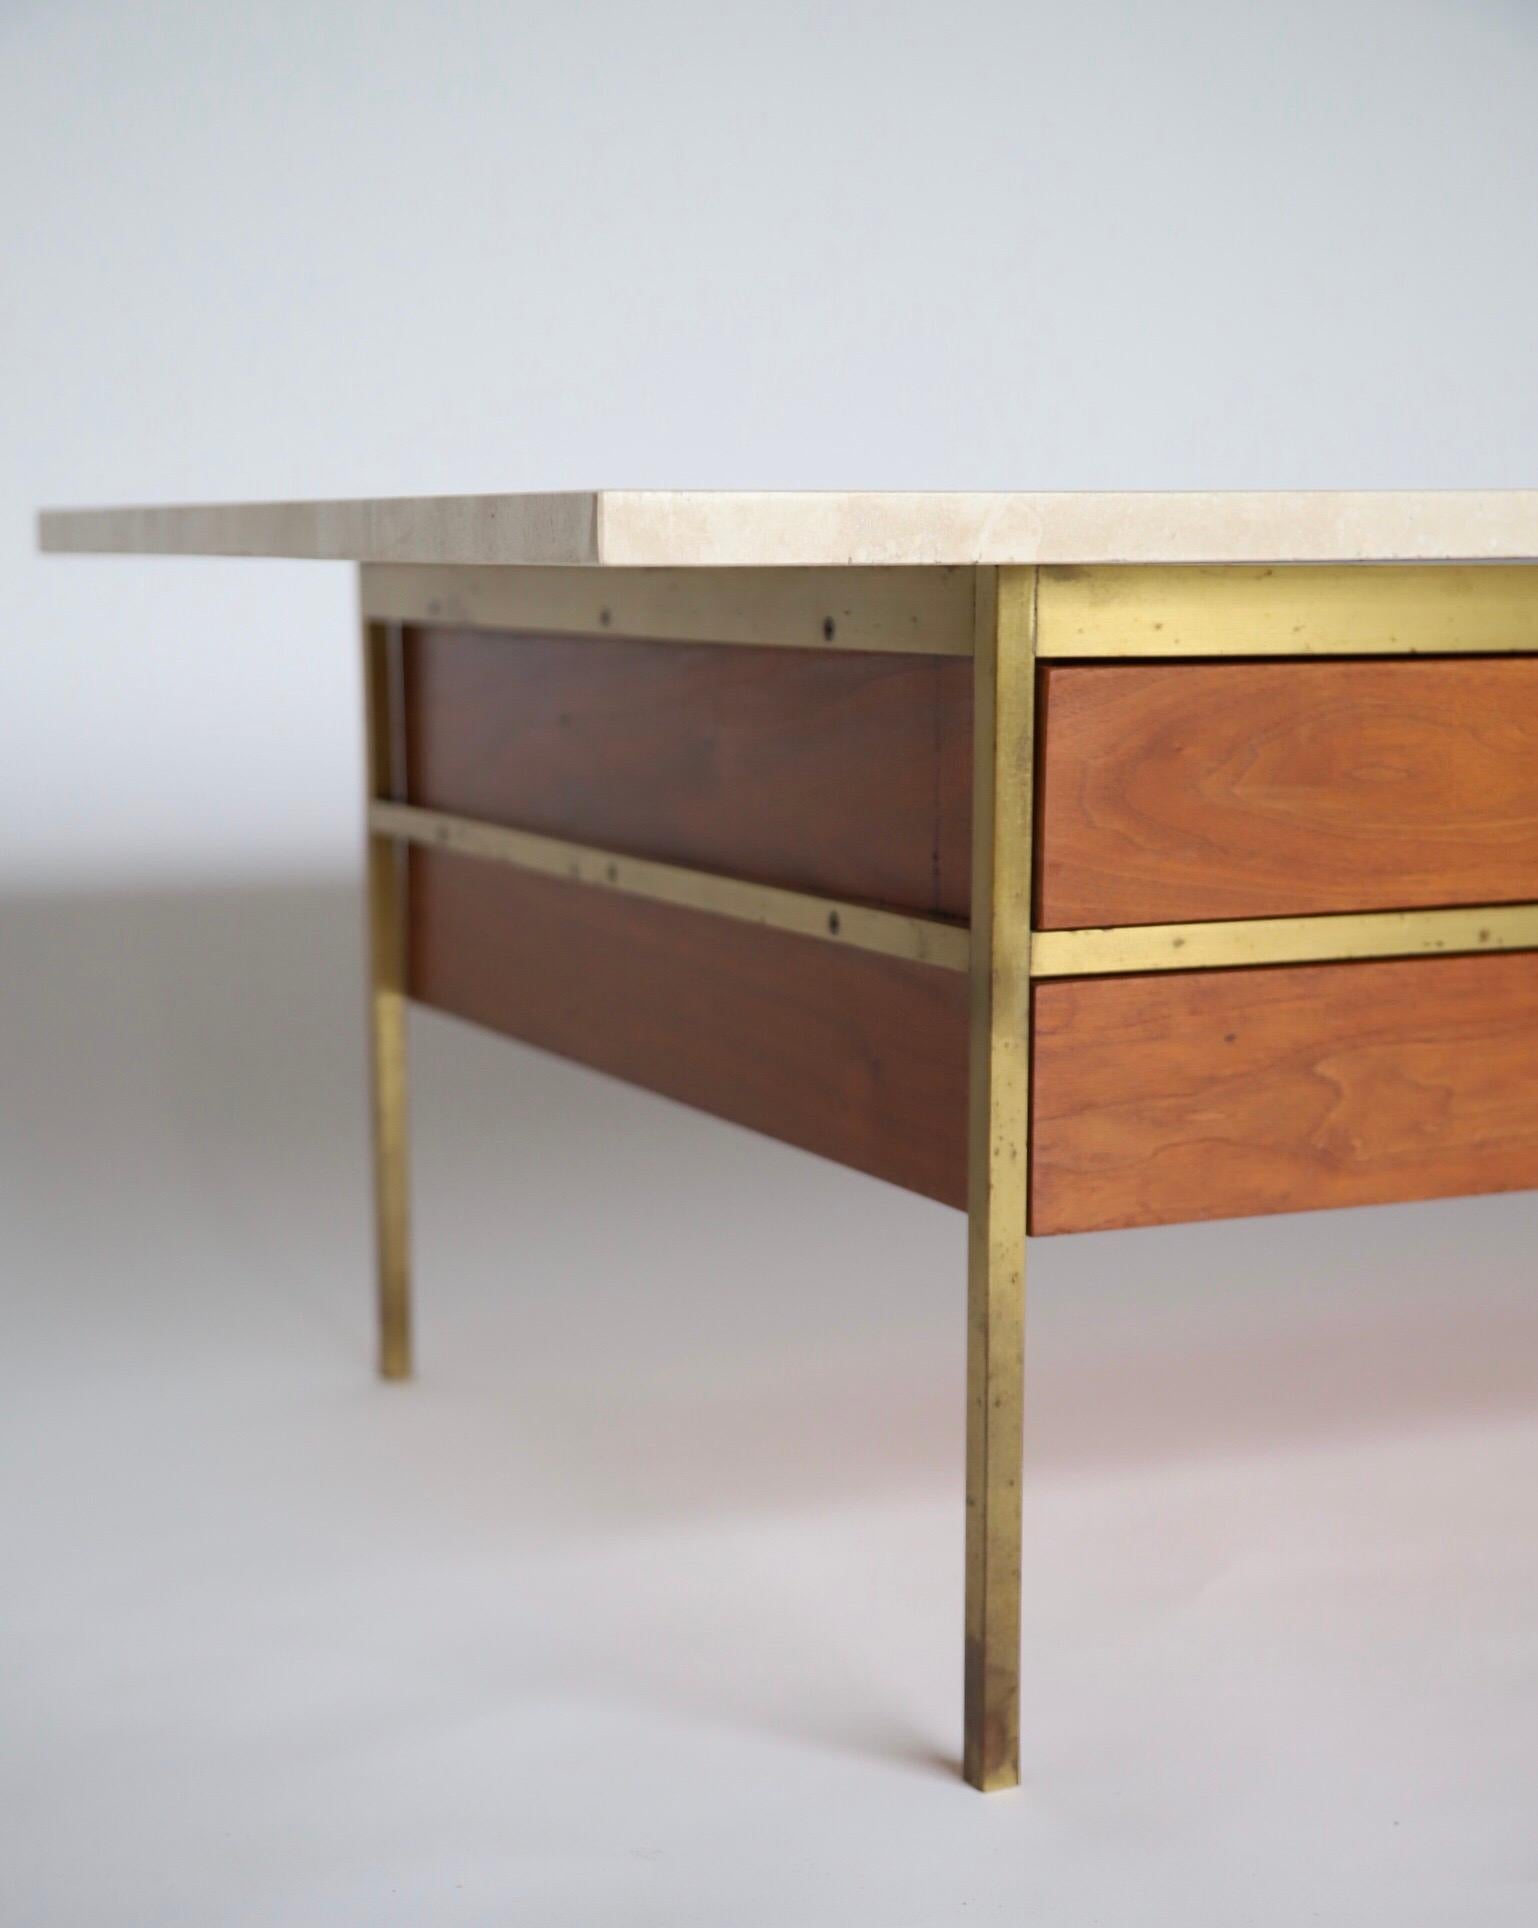 A stunning coffee table by Paul McCobb for Calvin. Travertine top, walnut body, two drawers and a shelf. A cocktail table for the ages.